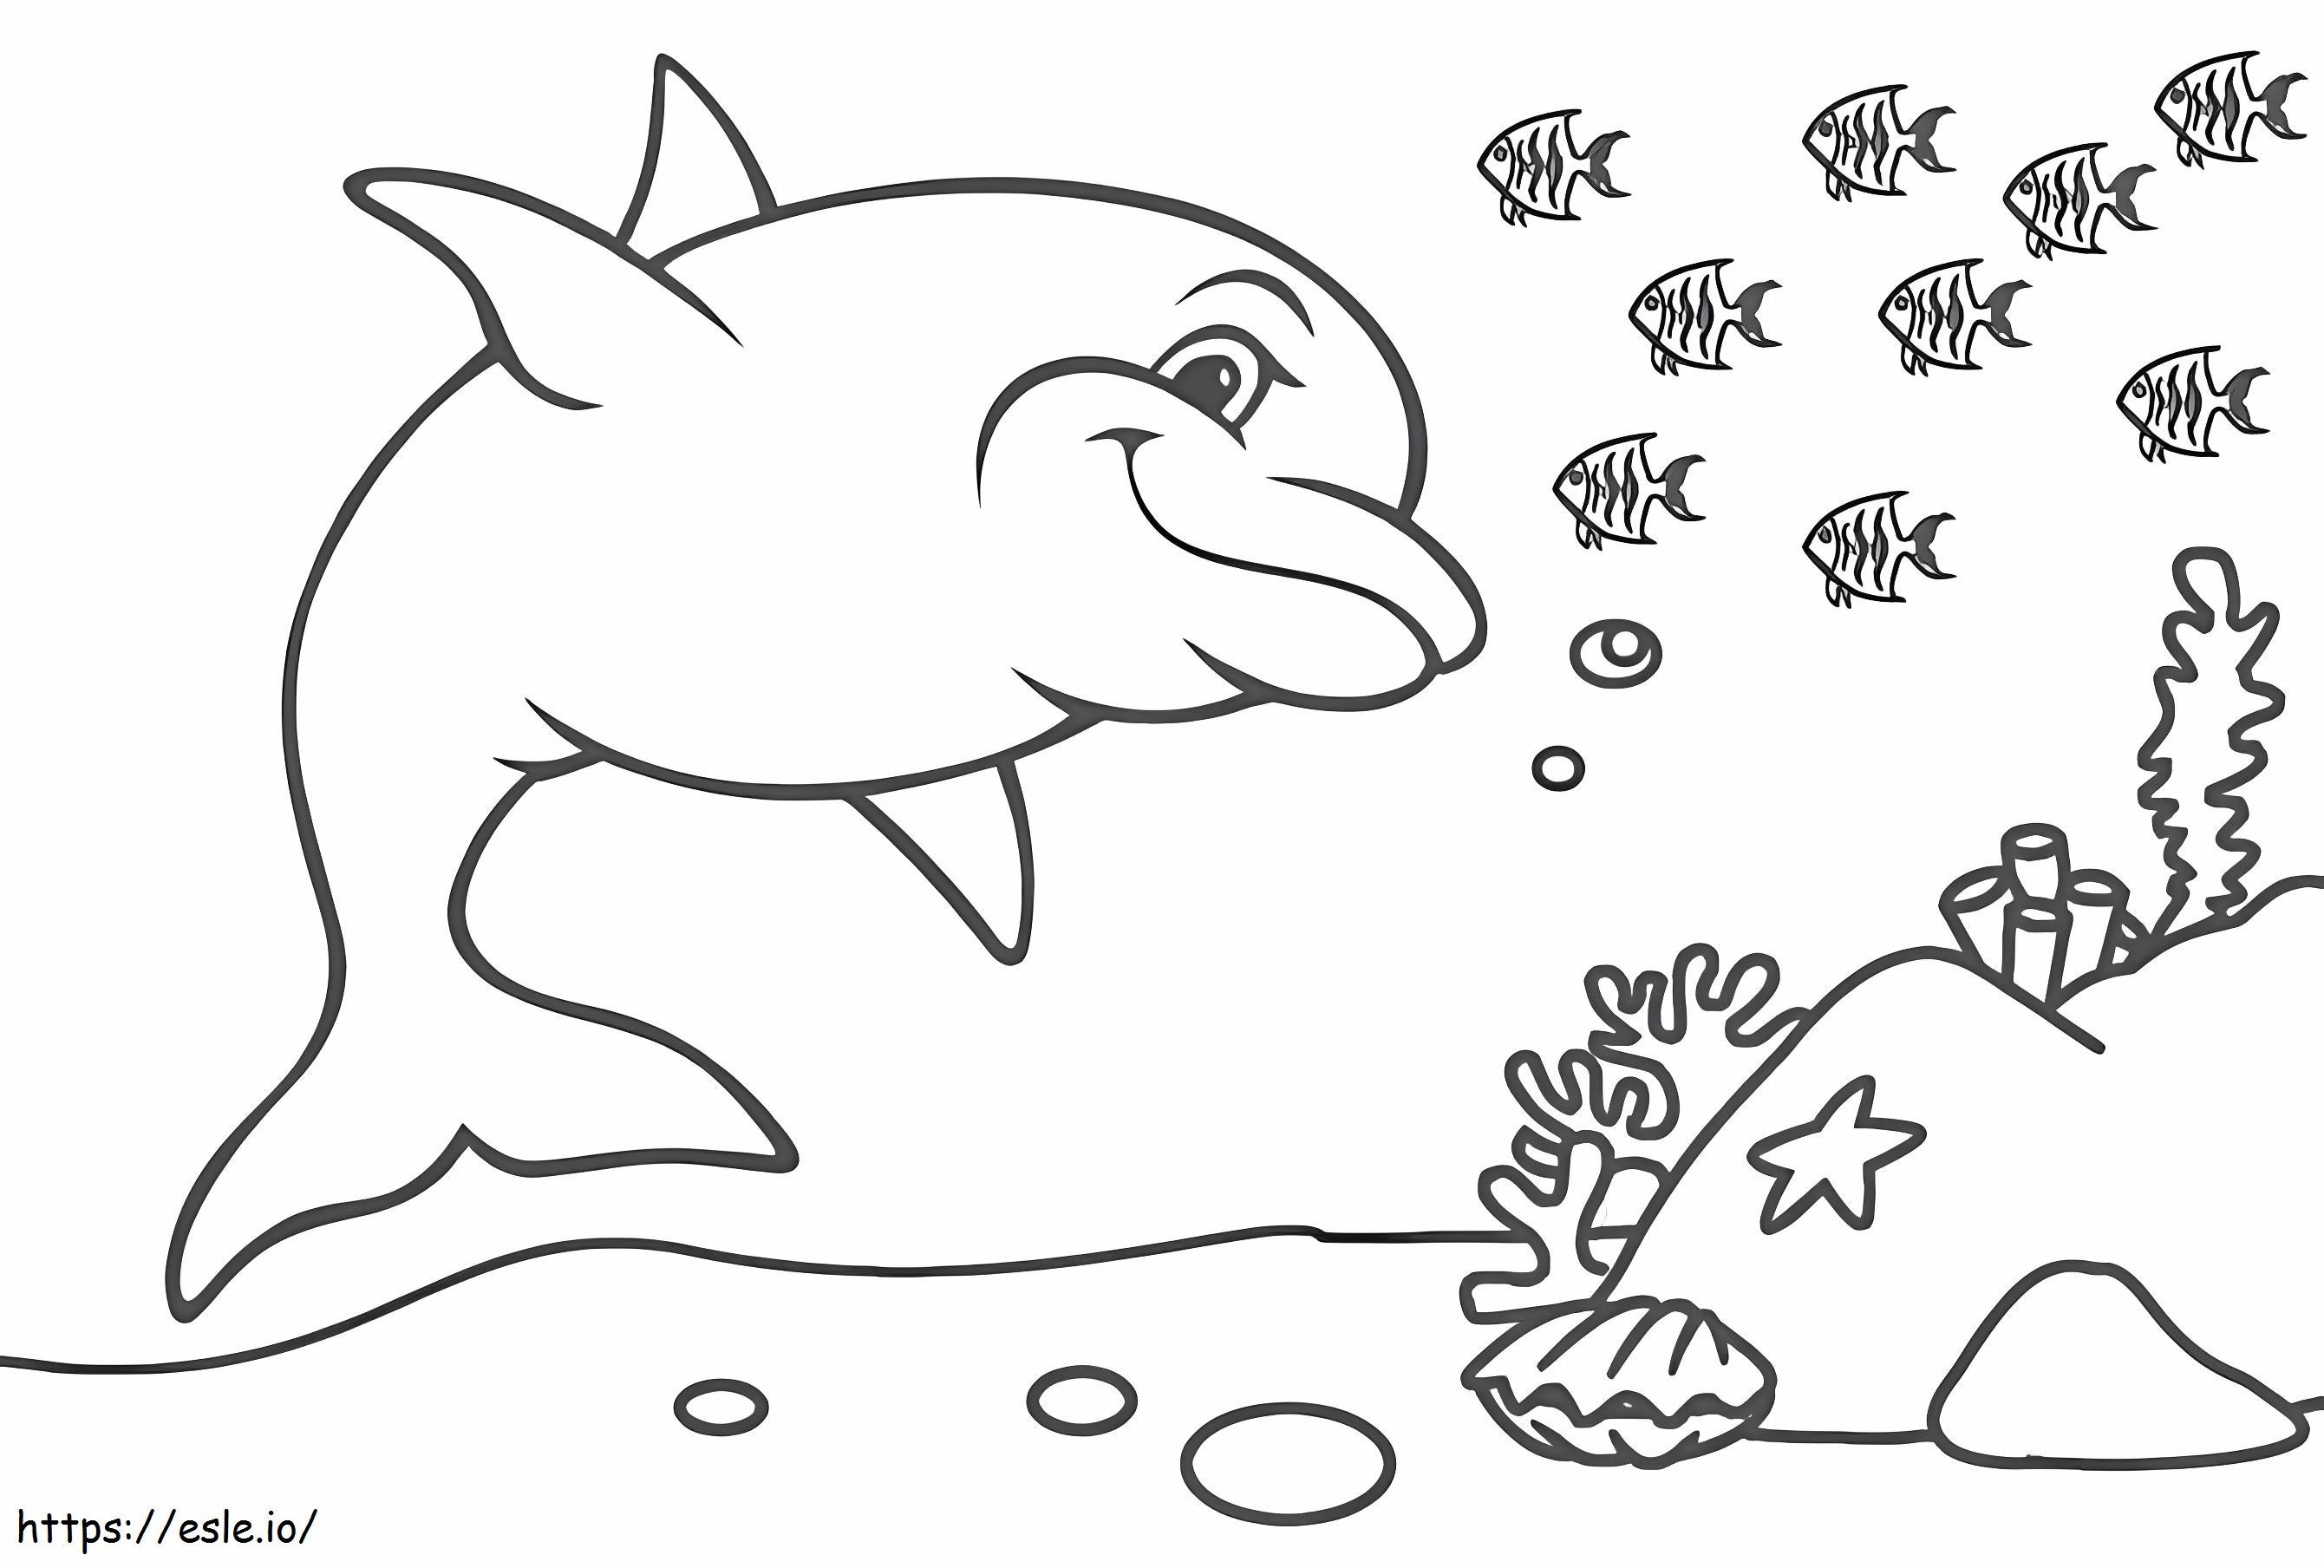 Dolphin Smiles coloring page